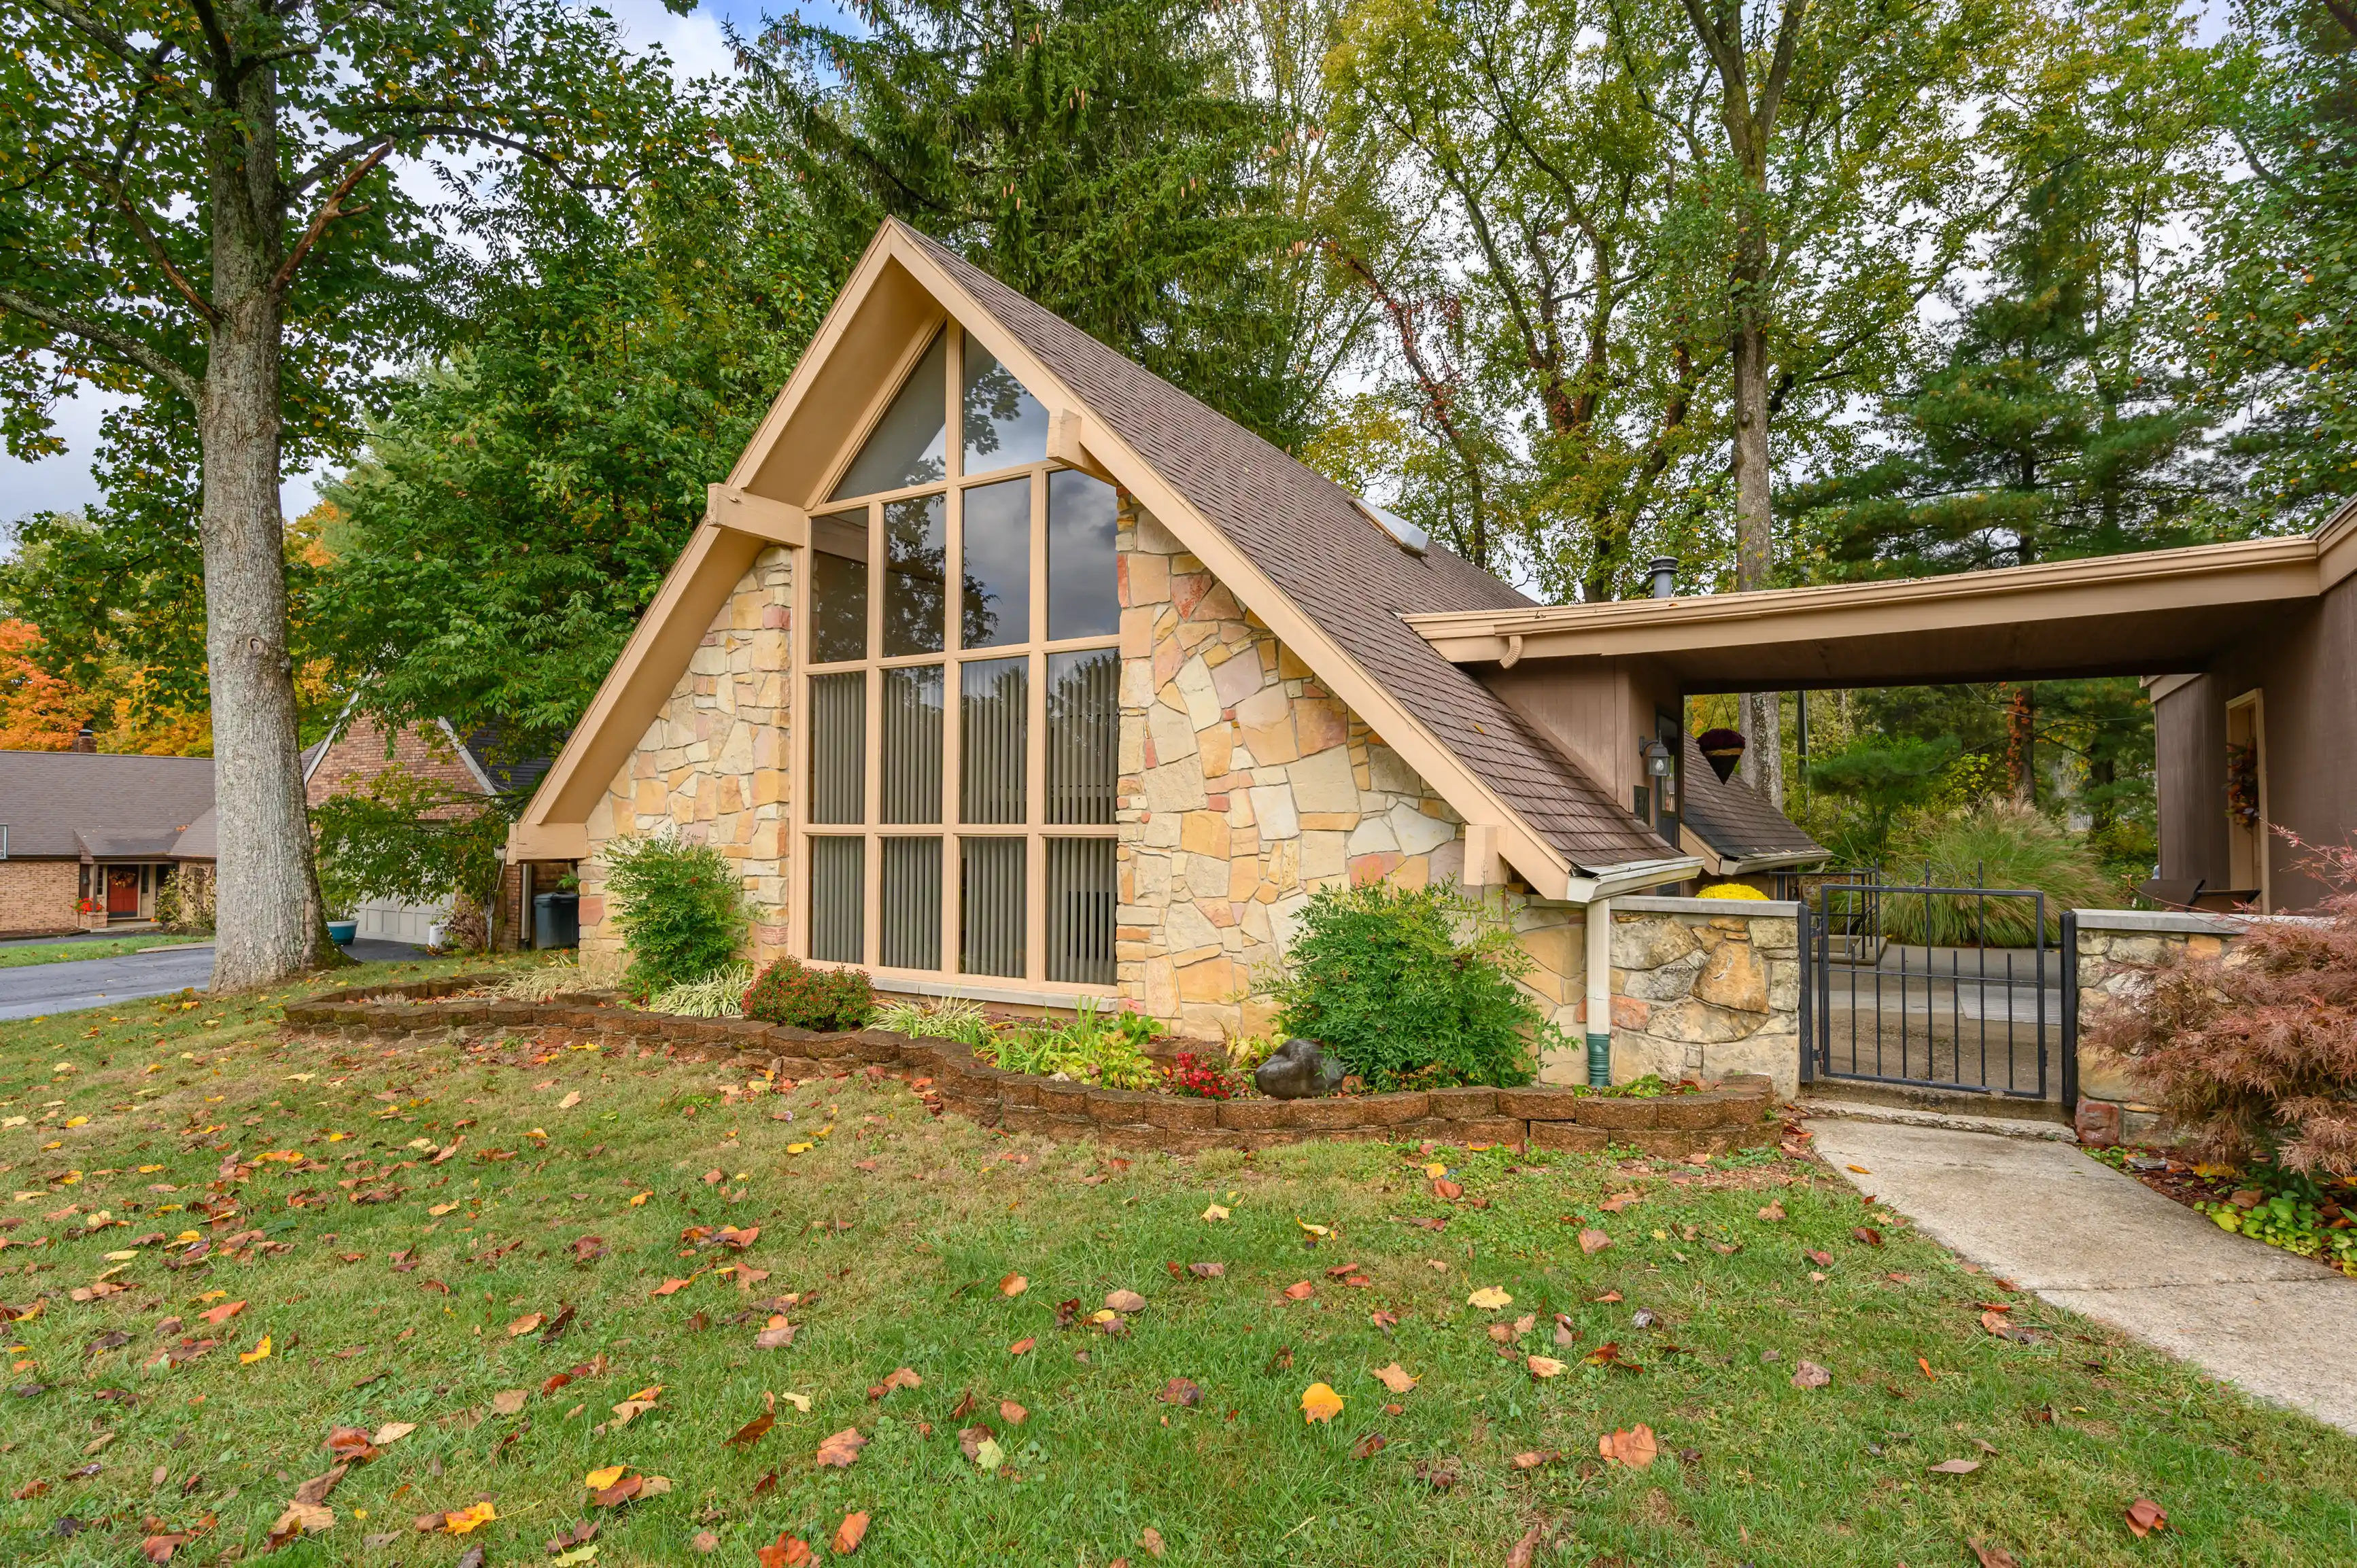 A unique A-frame house with large windows, stone accents, and a carport surrounded by trees in an autumn setting.